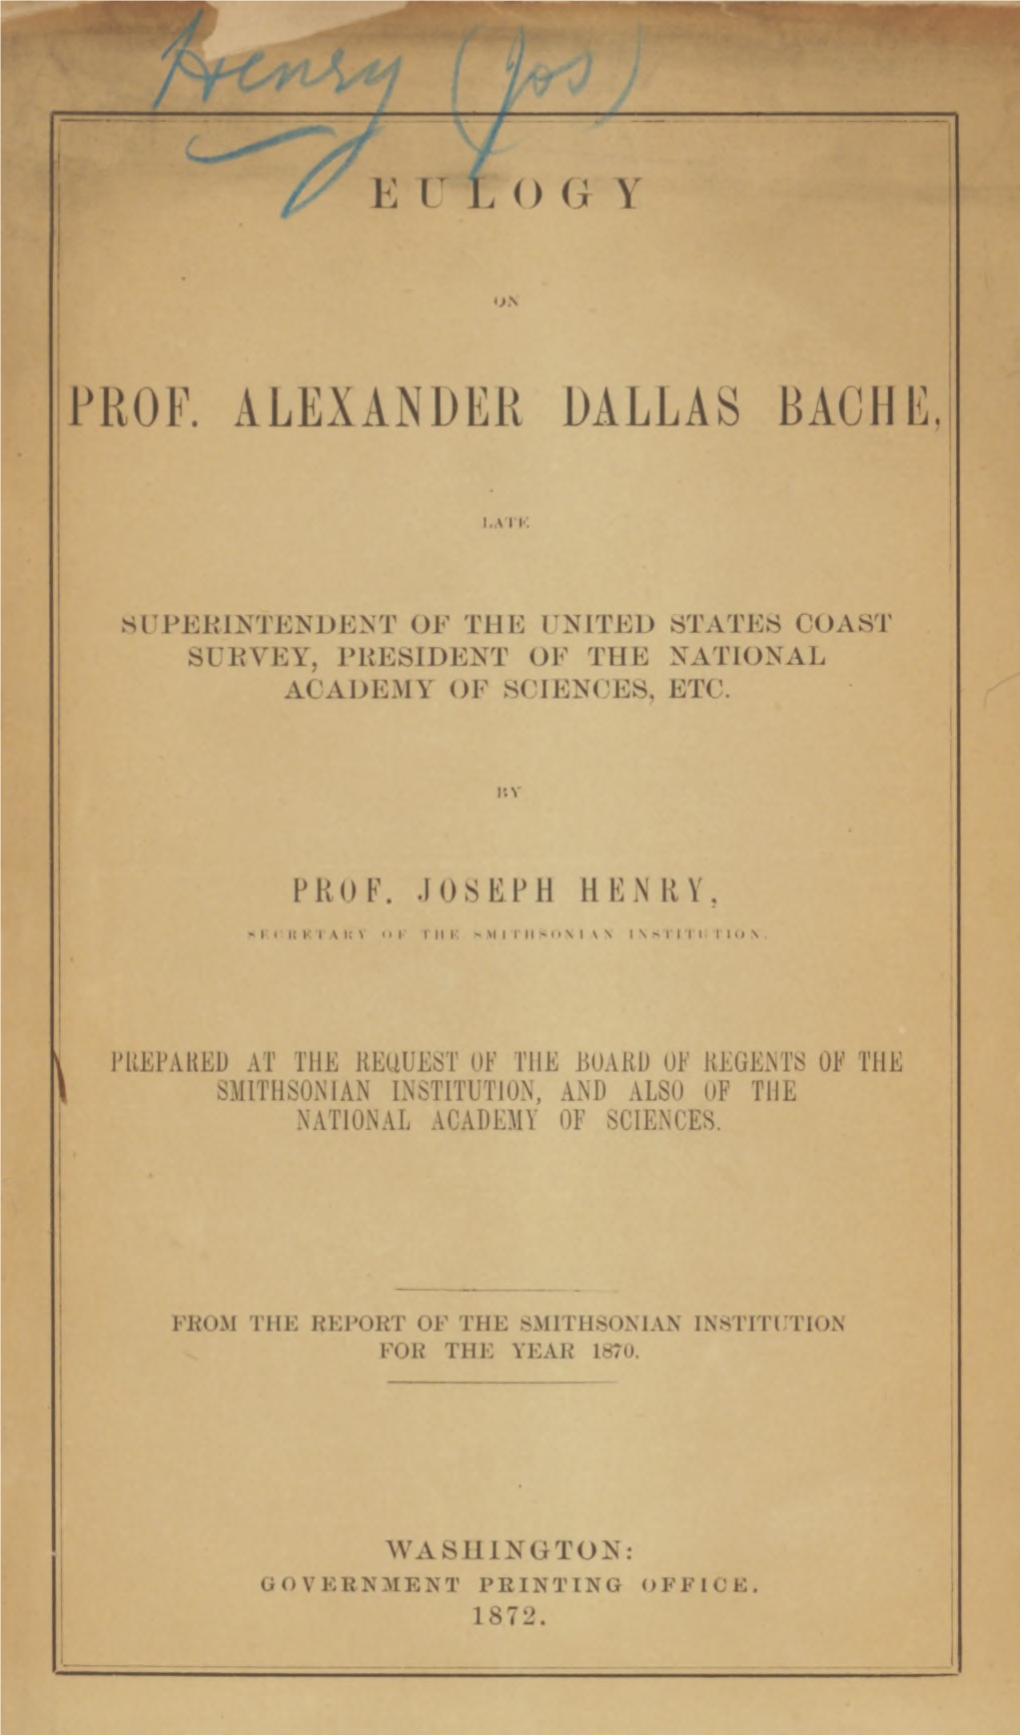 Eulogy on Prof. Alexander Dallas Bache, Late Superintendent of the United States Coast Survey